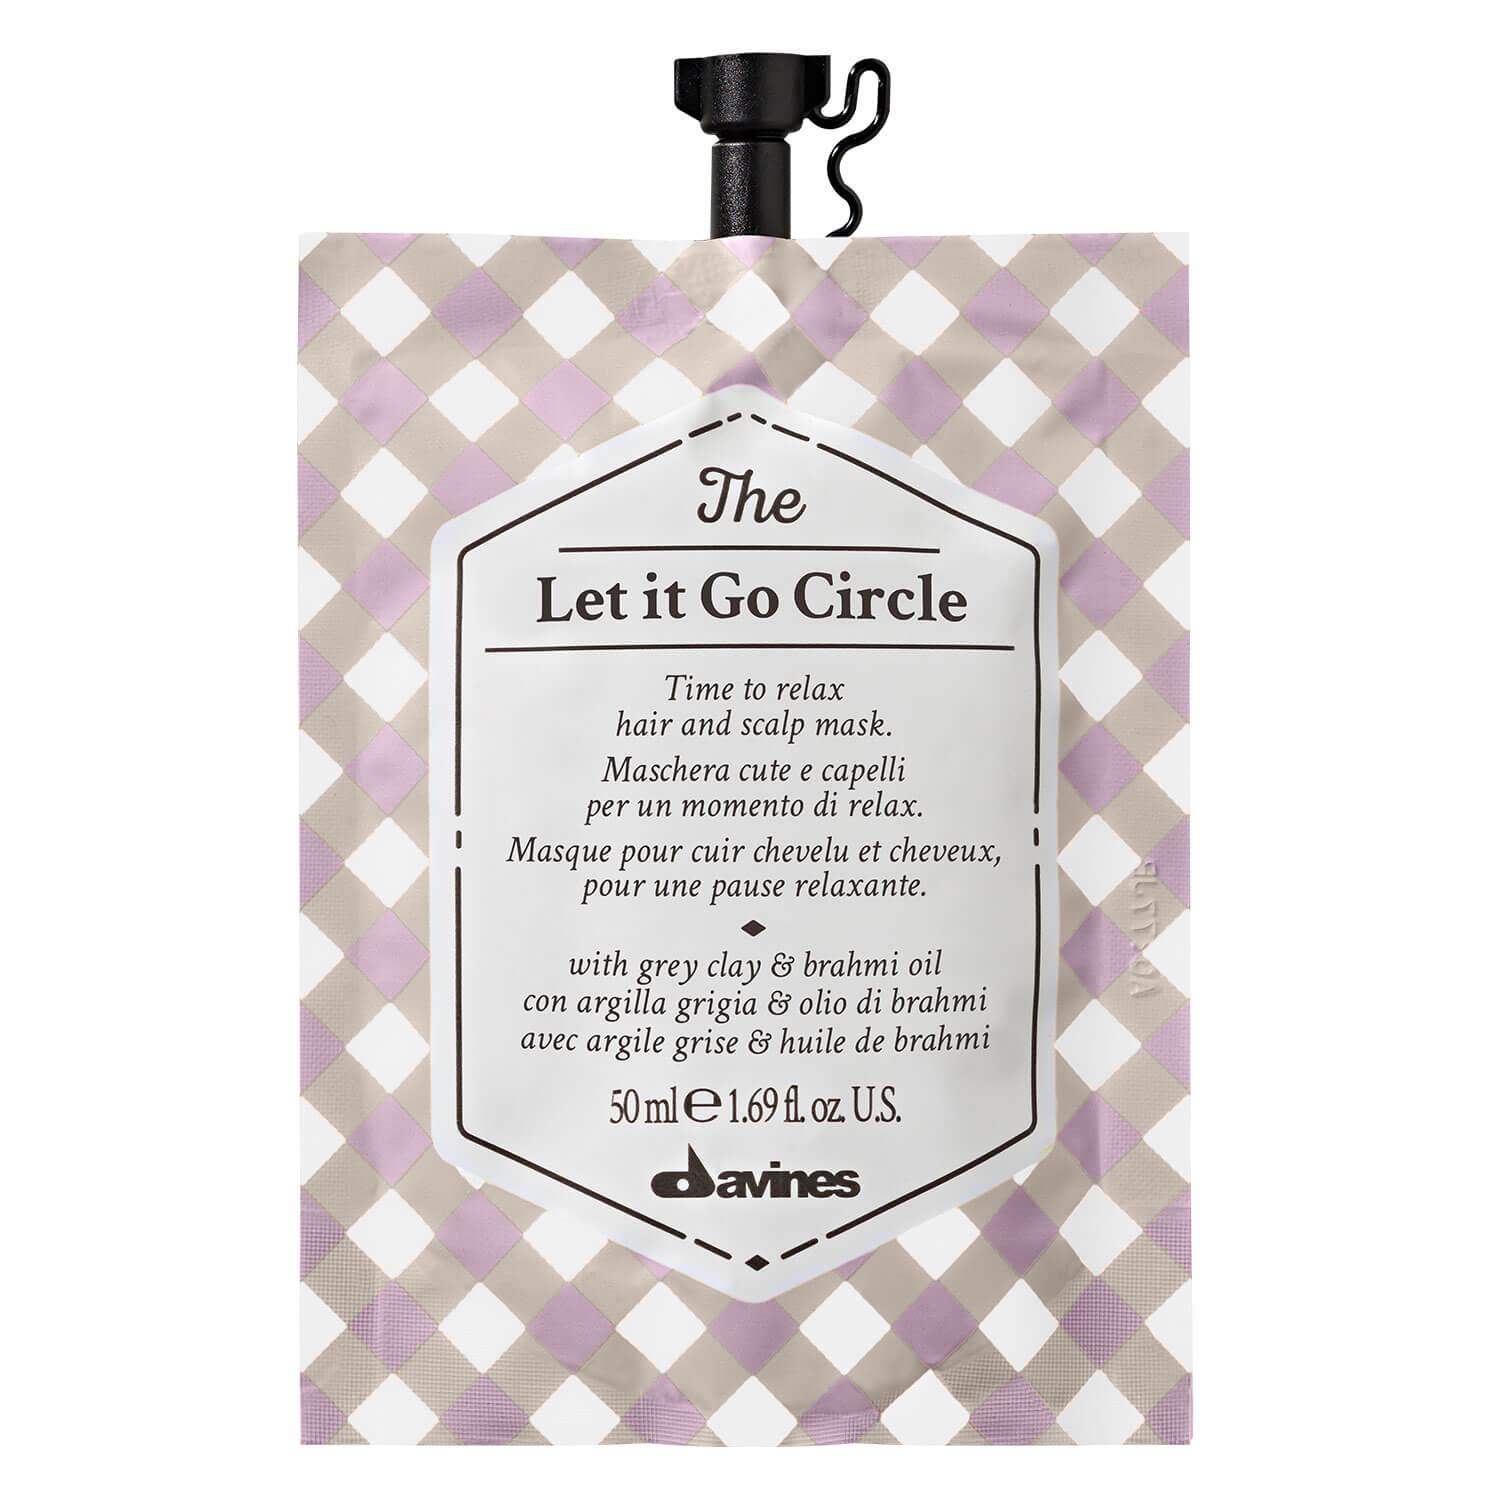 The Circle Chronicles - The Let it Go Circle